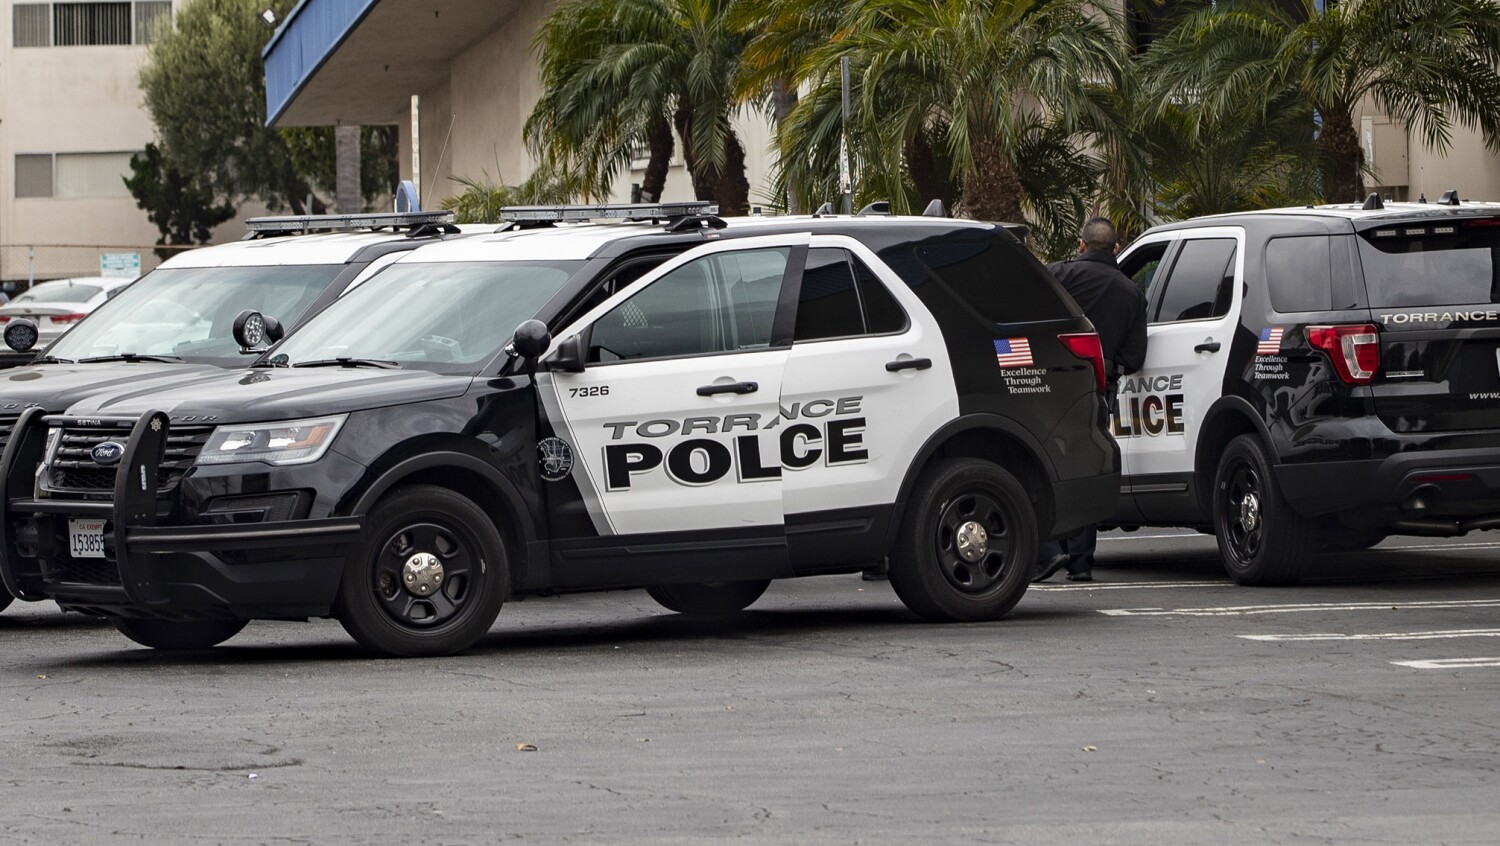 This isn't the first time Torrance Police Department has been accused of widespread racism